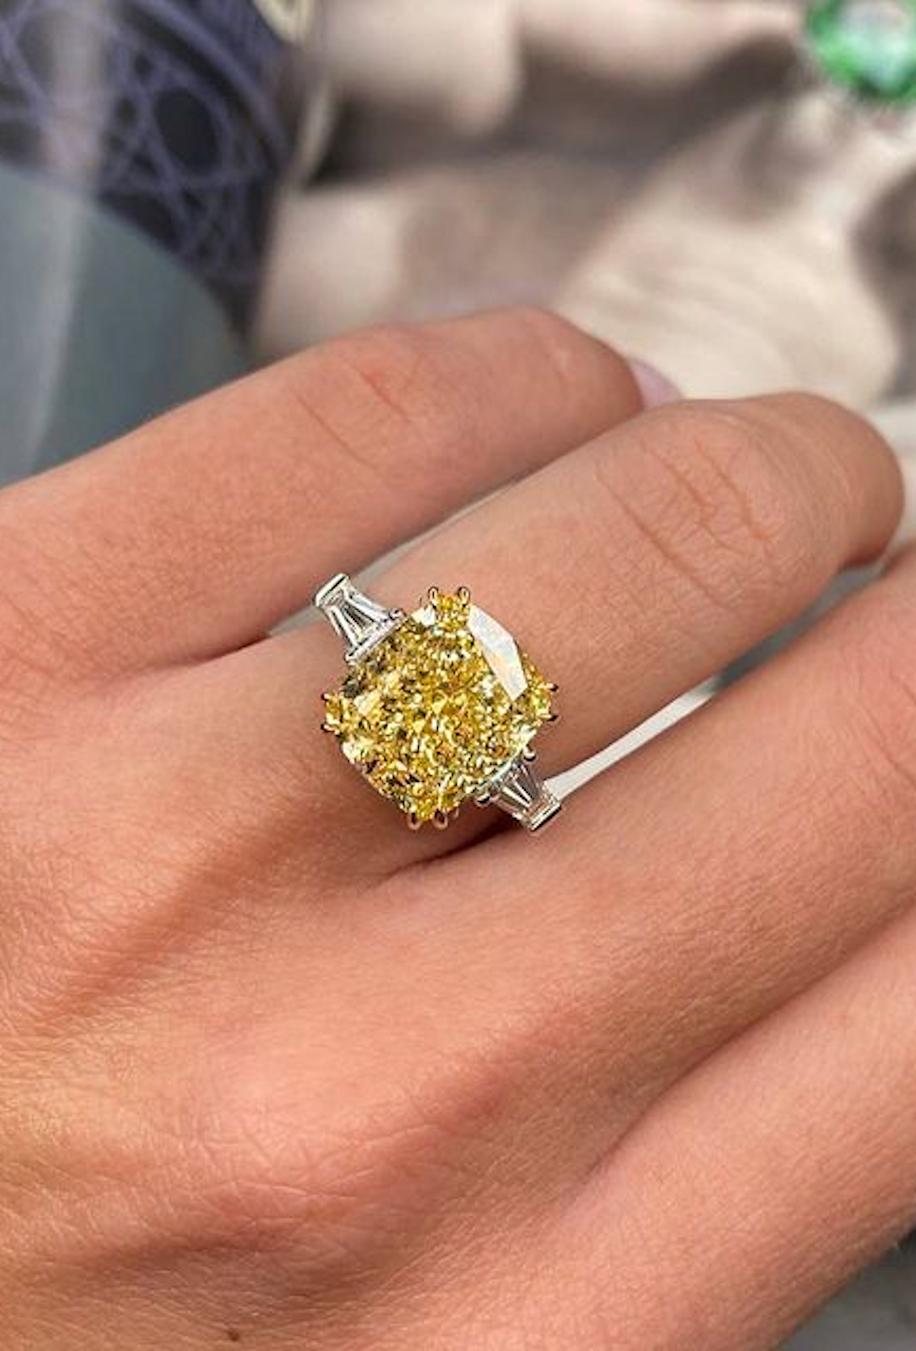 An exquisite GIA certified fancy intense yellow cushion cut diamond ring with two side tapered baguette natural diamonds at each side mounted in 18 carats yellow gold and white gold.

The main stone has a strong yellow. The stone has an intense